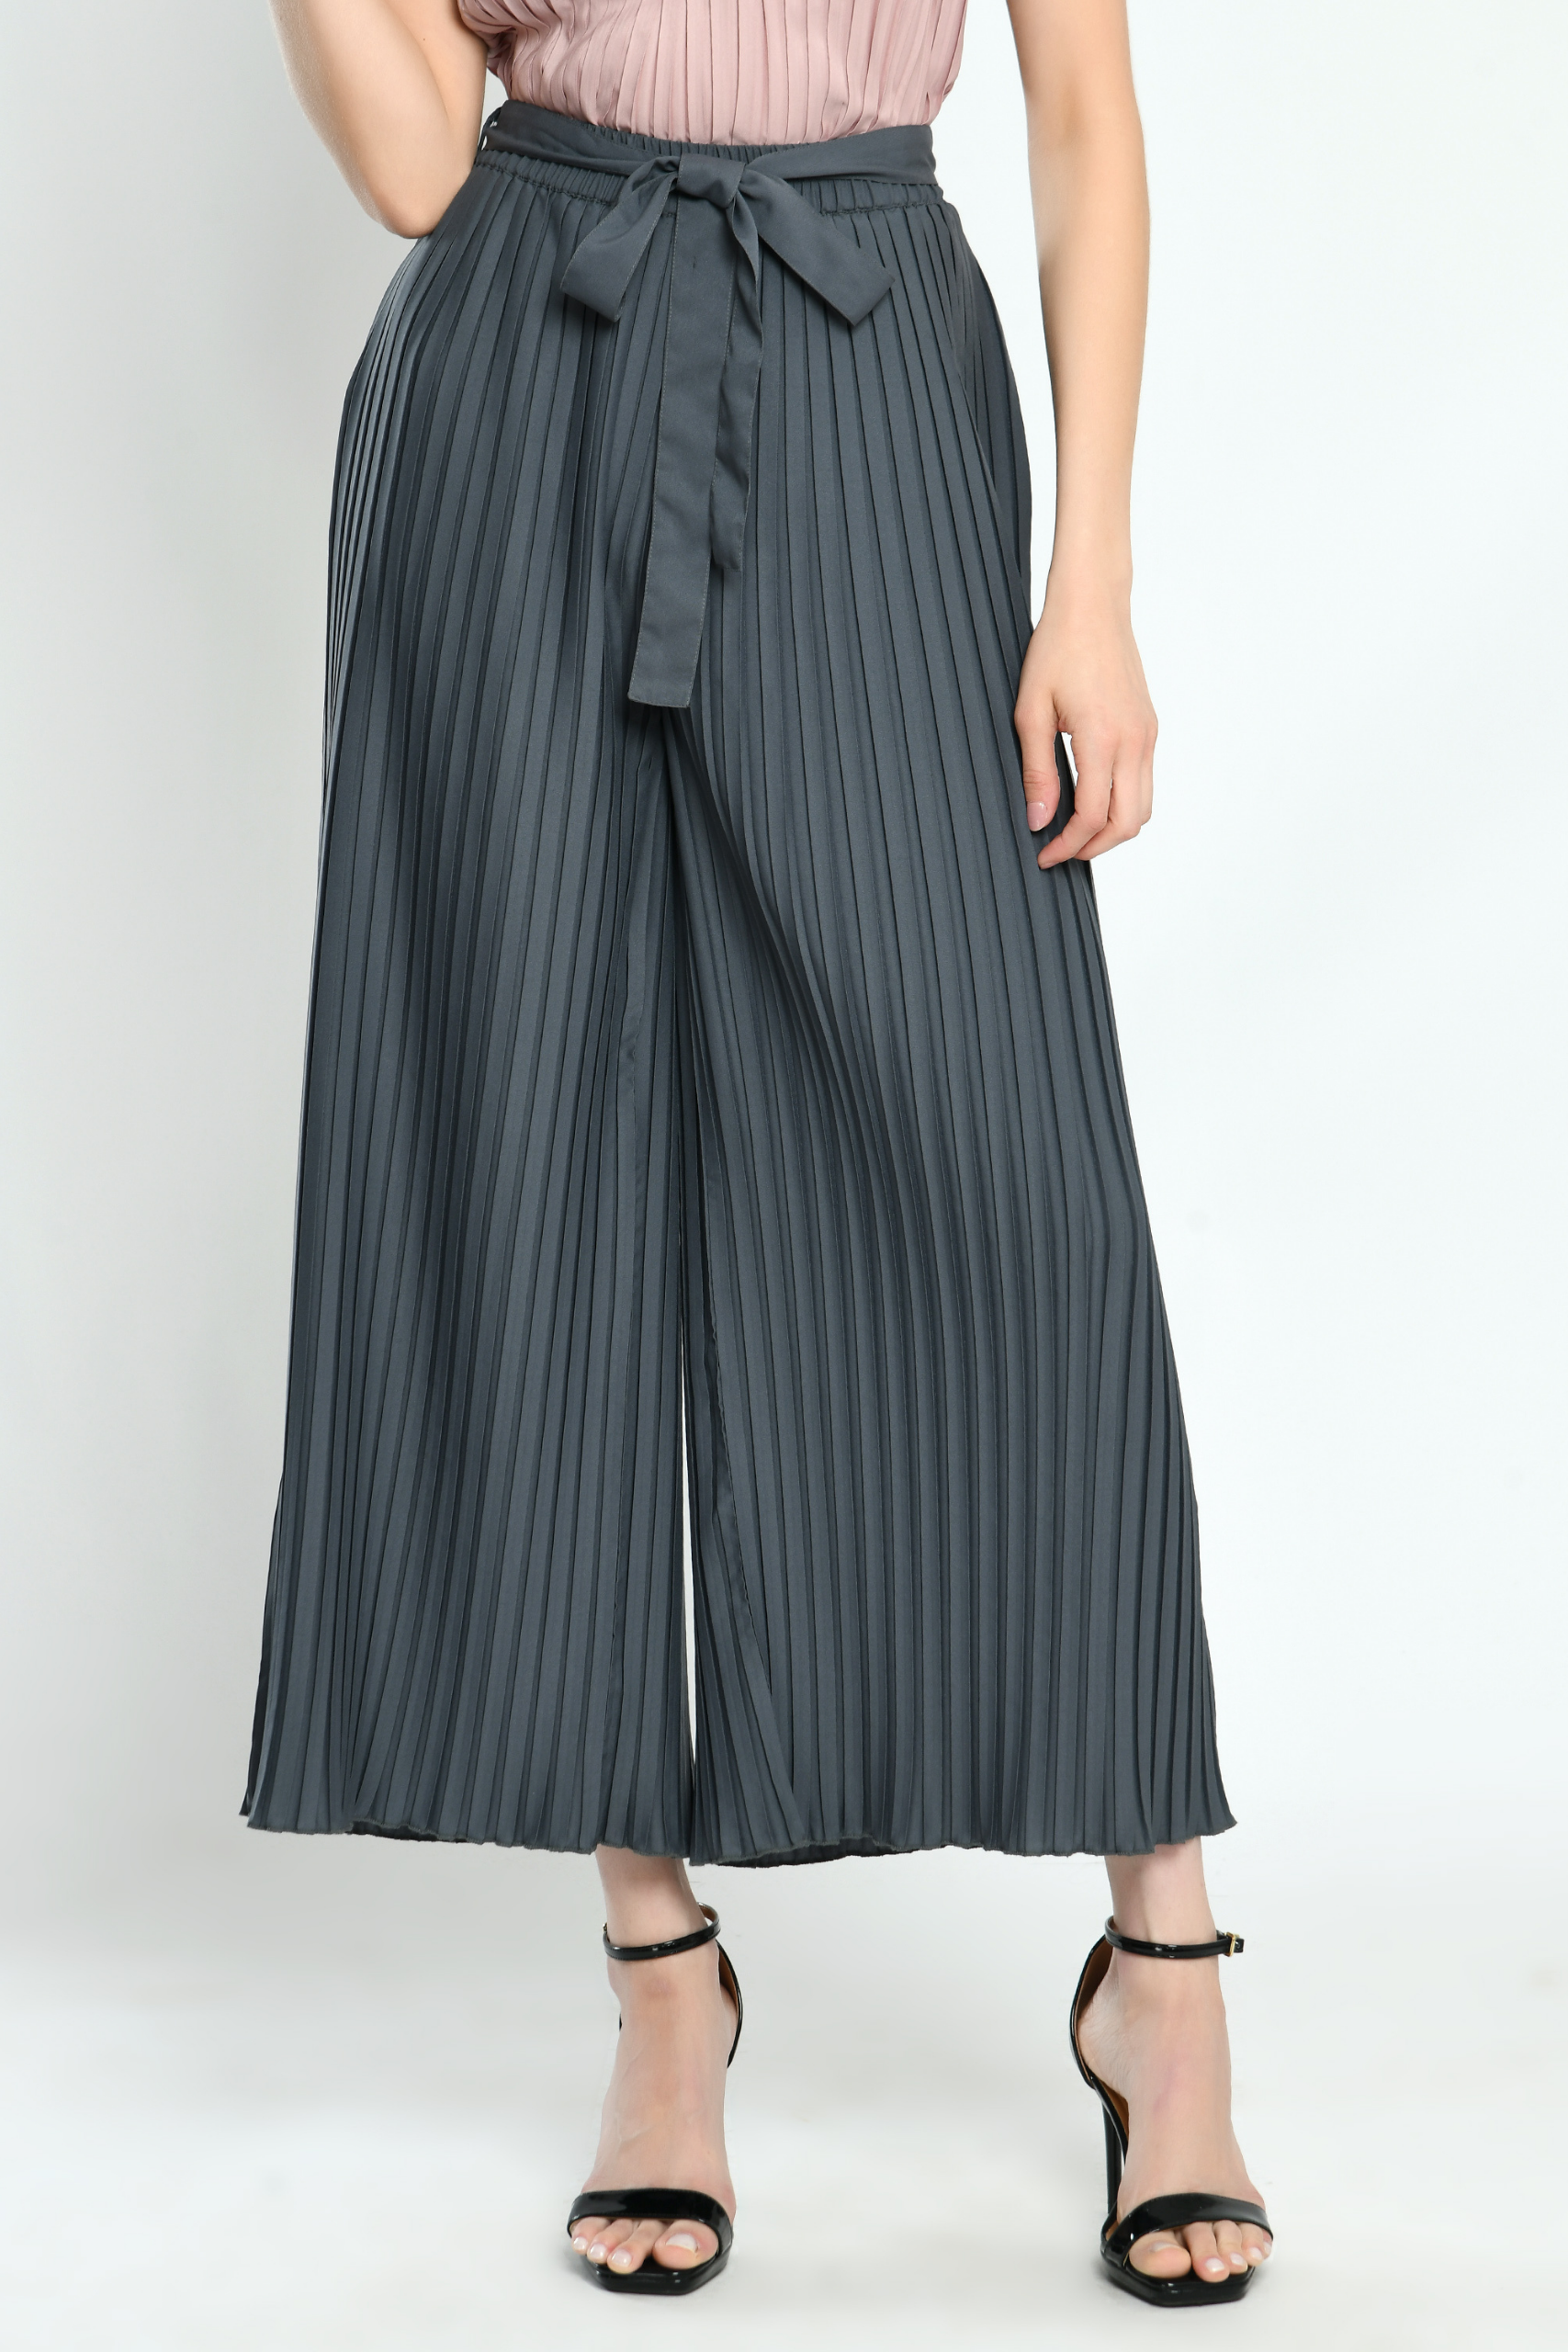 Uniqlo Pleated Palazzo Pants Size S, Women's Fashion, Bottoms, Other  Bottoms on Carousell